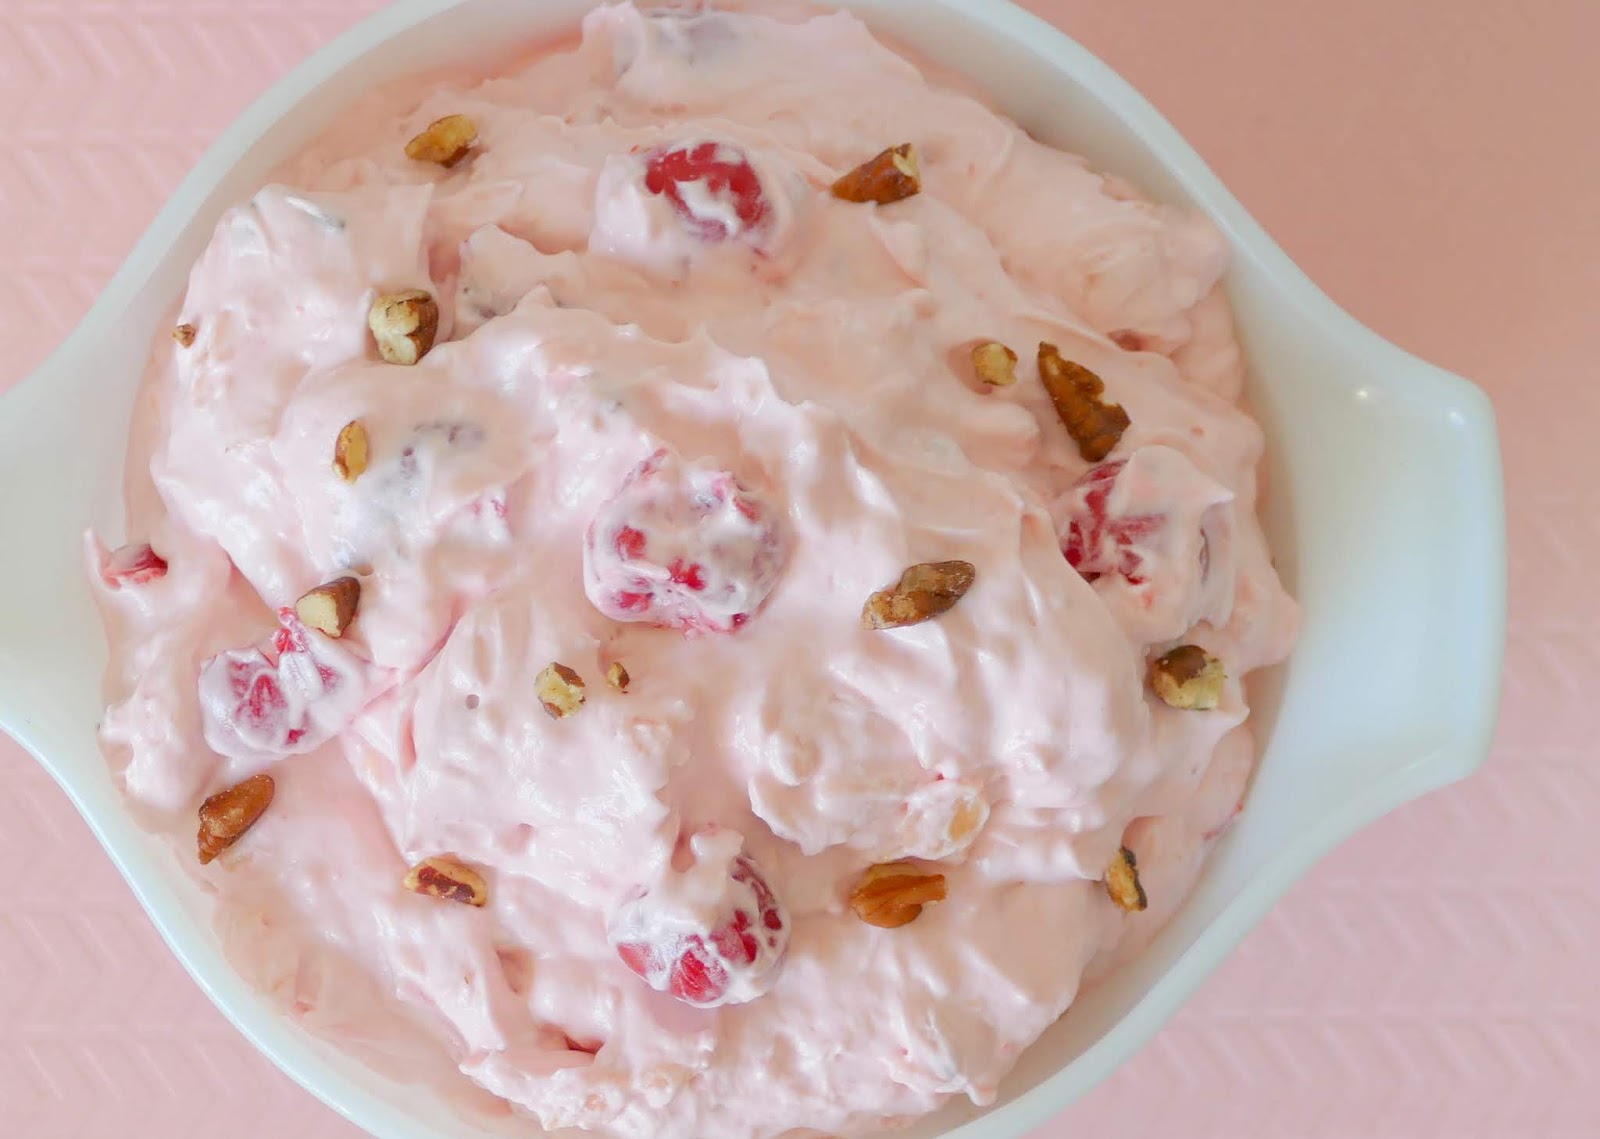 This super easy and delicious dessert fluff salad is great for parties, holidays and potlucks! It will bring you back to your childhood and gets it's flavor from cherry pie filling, crushed pineapple and pecans! Just like Grandma used to make and ready in minutes!